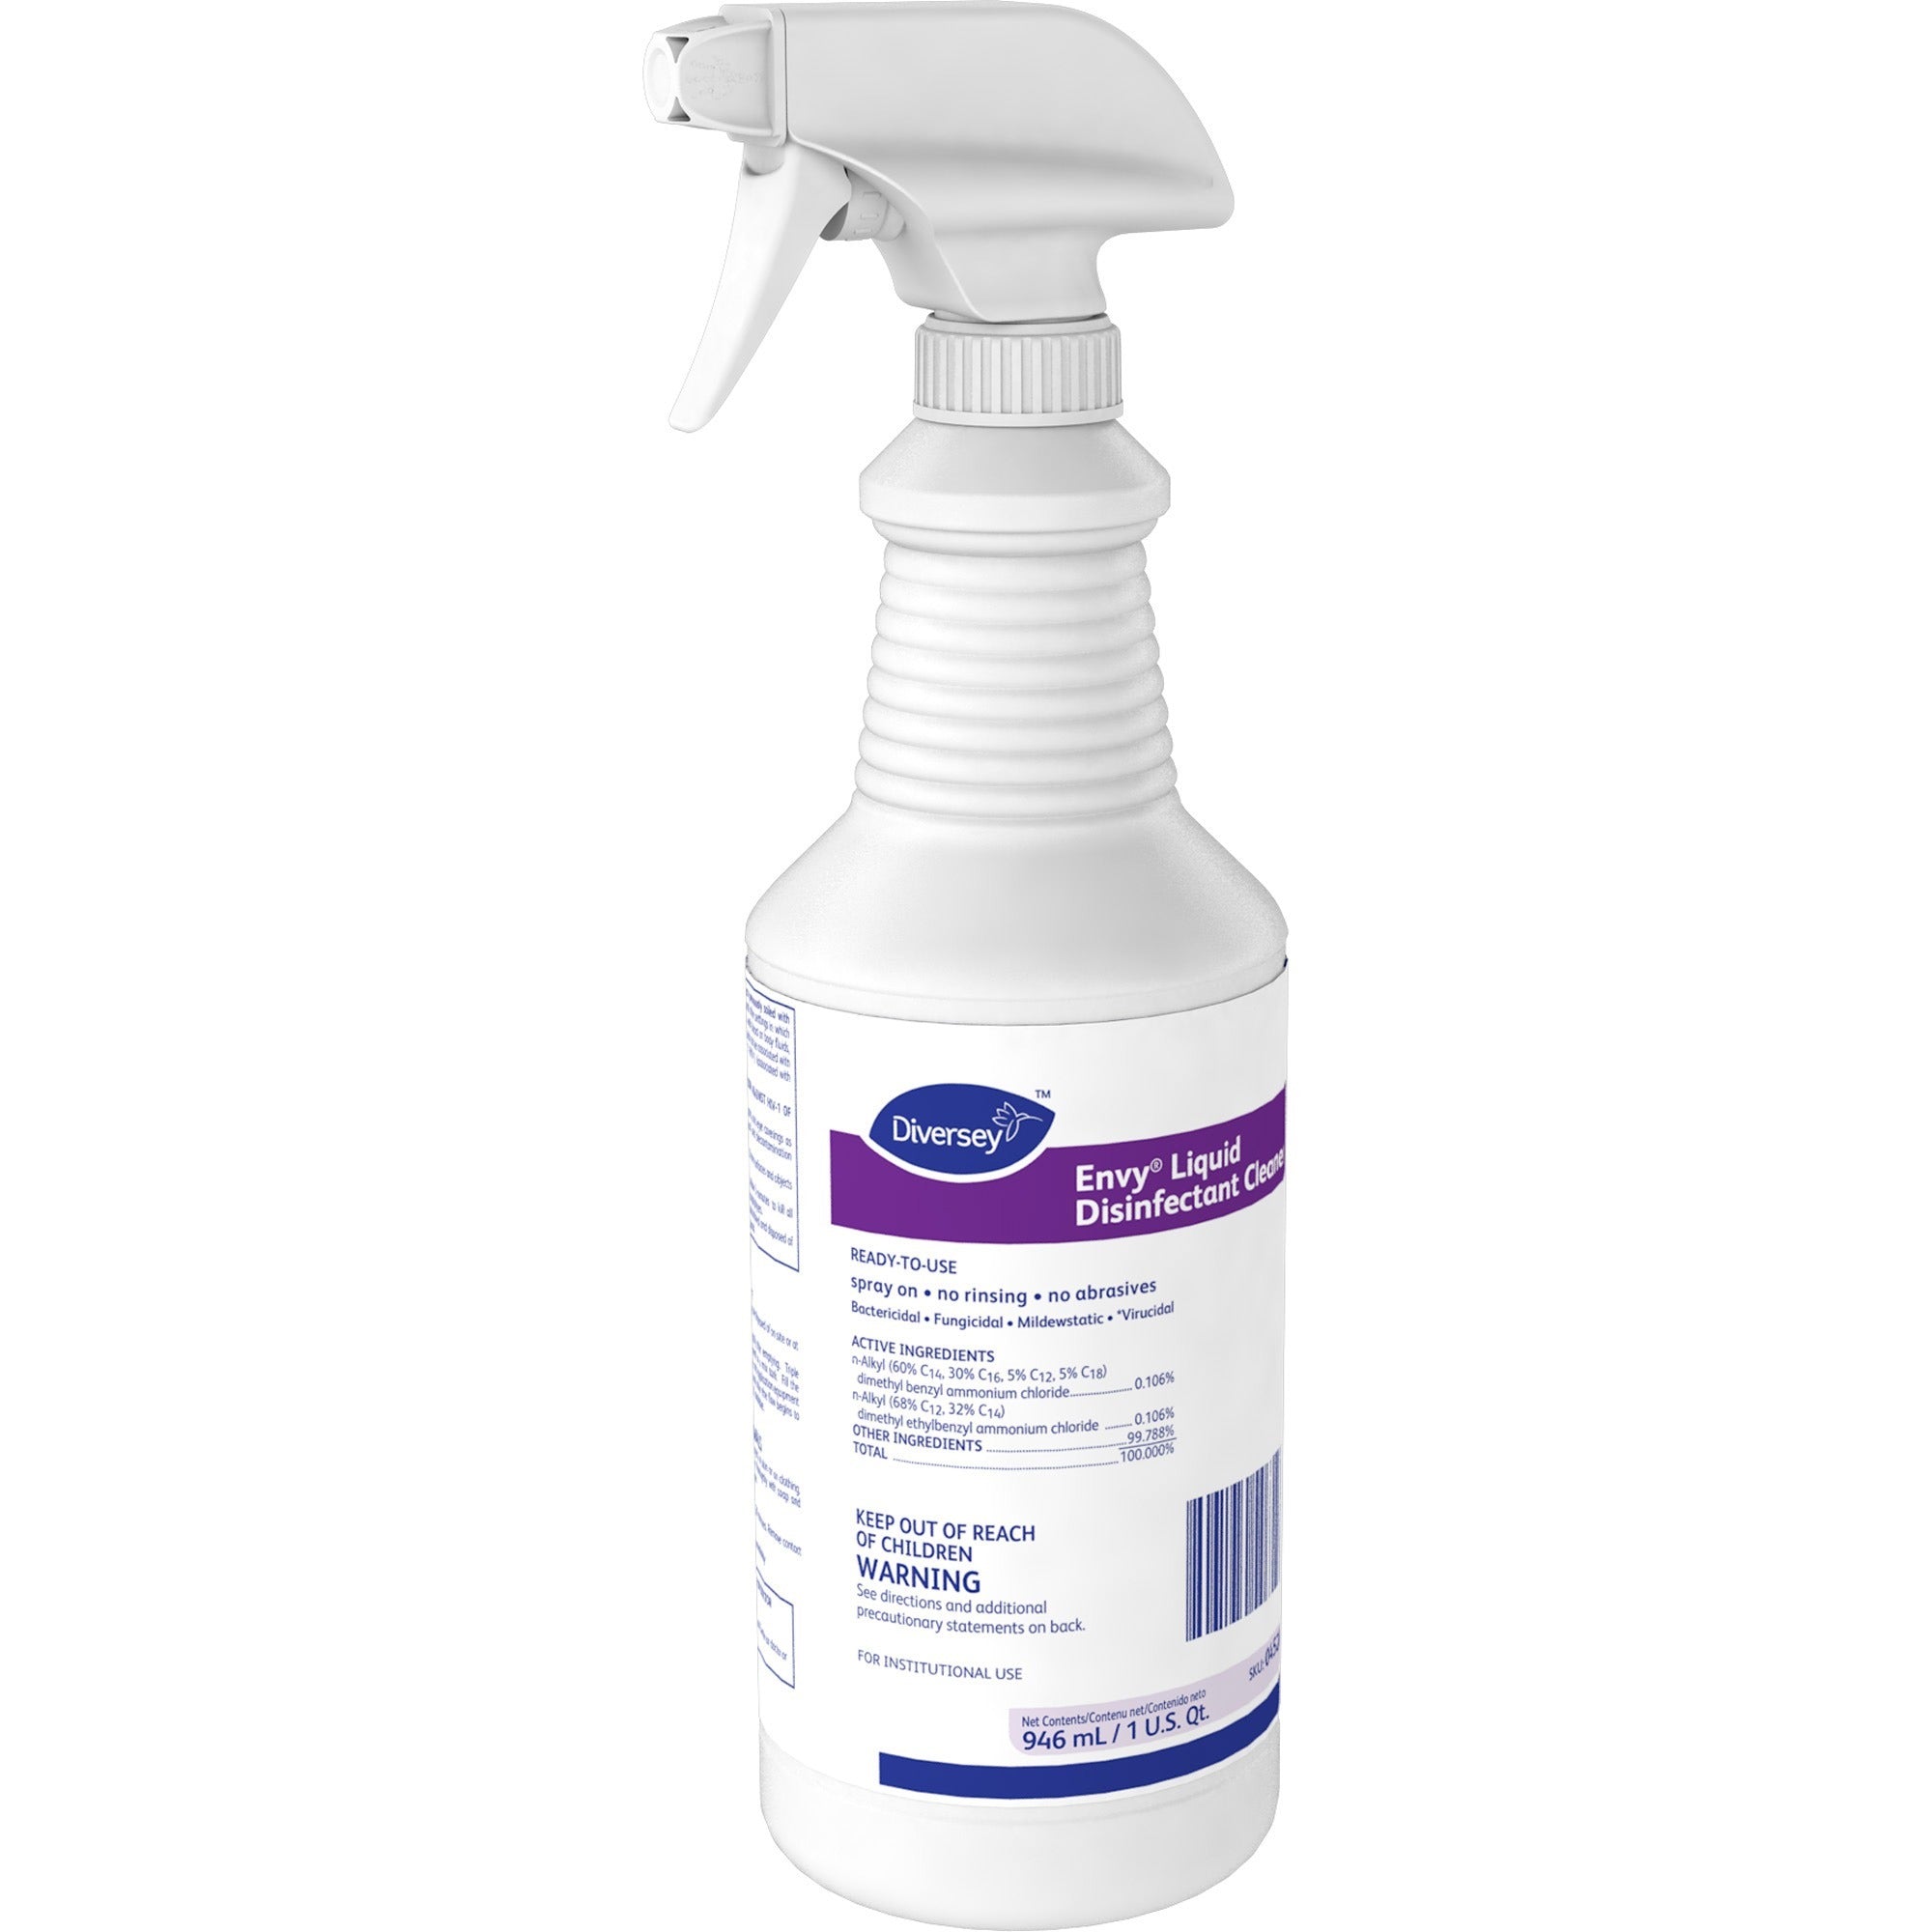 diversey-envy-liquid-disinfectant-cleaner-ready-to-use-32-fl-oz-1-quart-lavender-ammonia-scent-1-each-color-free-disinfectant-virucidal-bactericide-fungicide-mildewstatic-rinse-free-non-abrasive-deodorize-clear_dvo04528 - 3